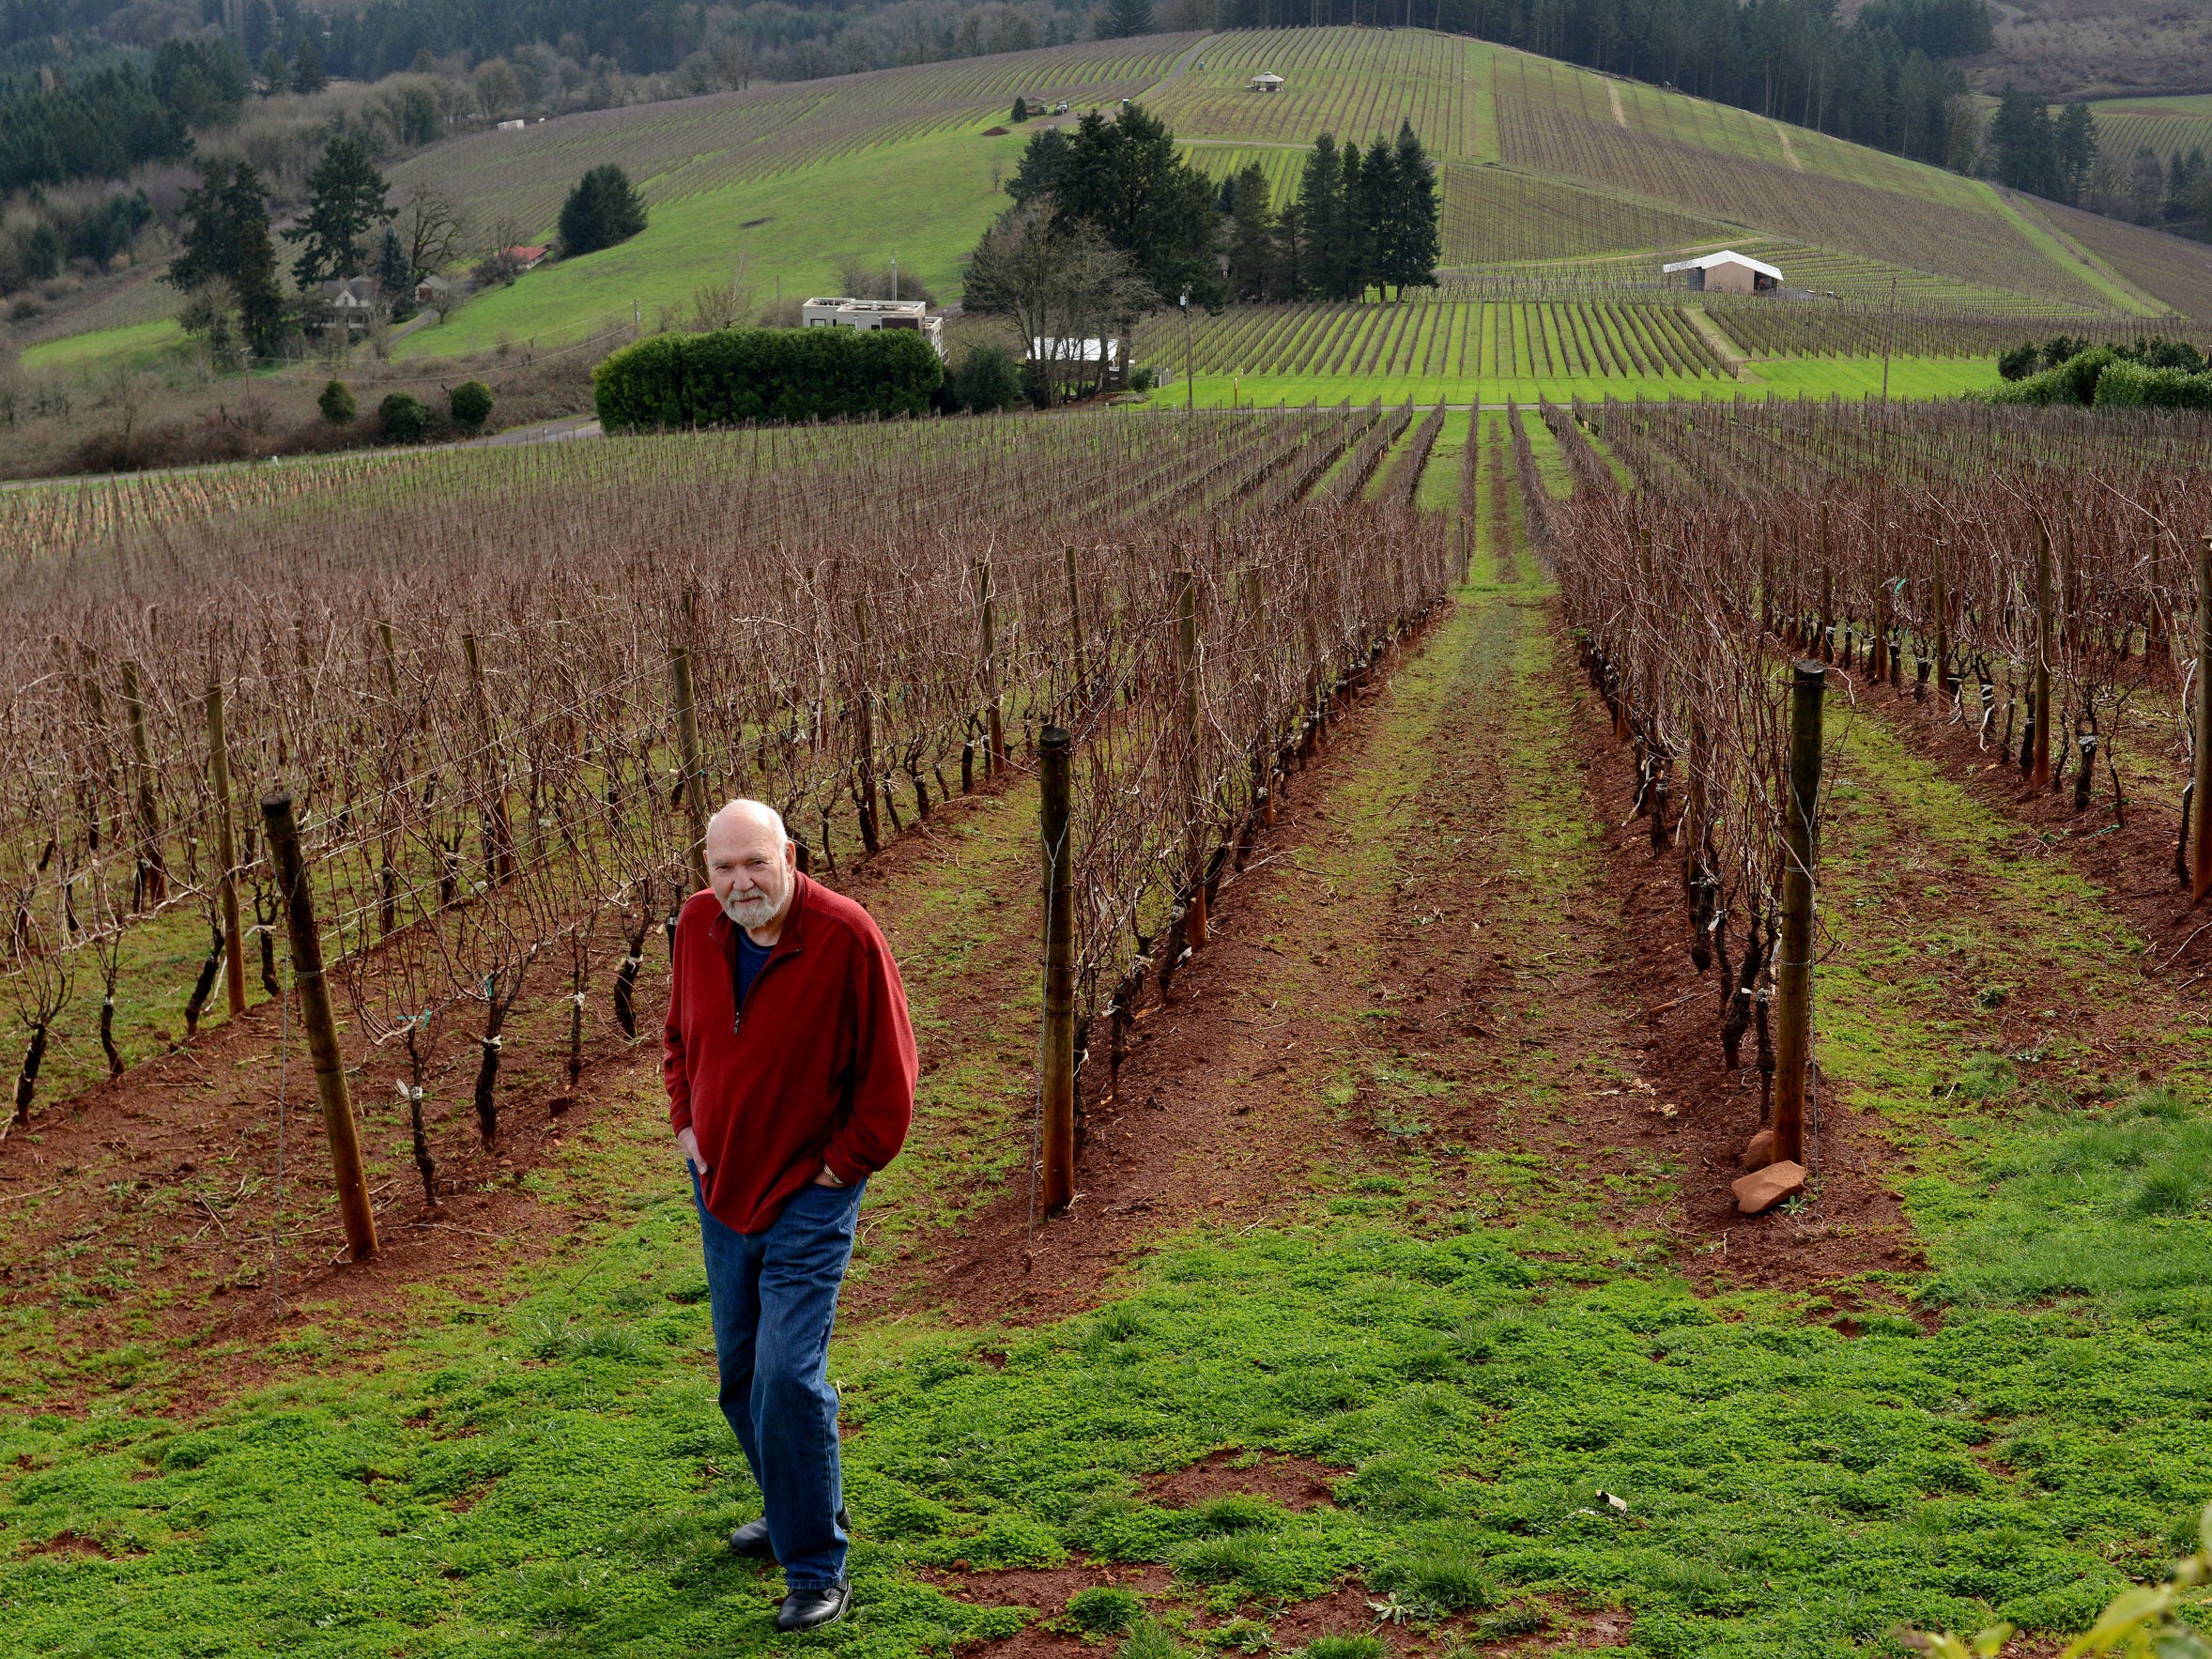 Dick Erath, one of the pioneers of pinot noir in the